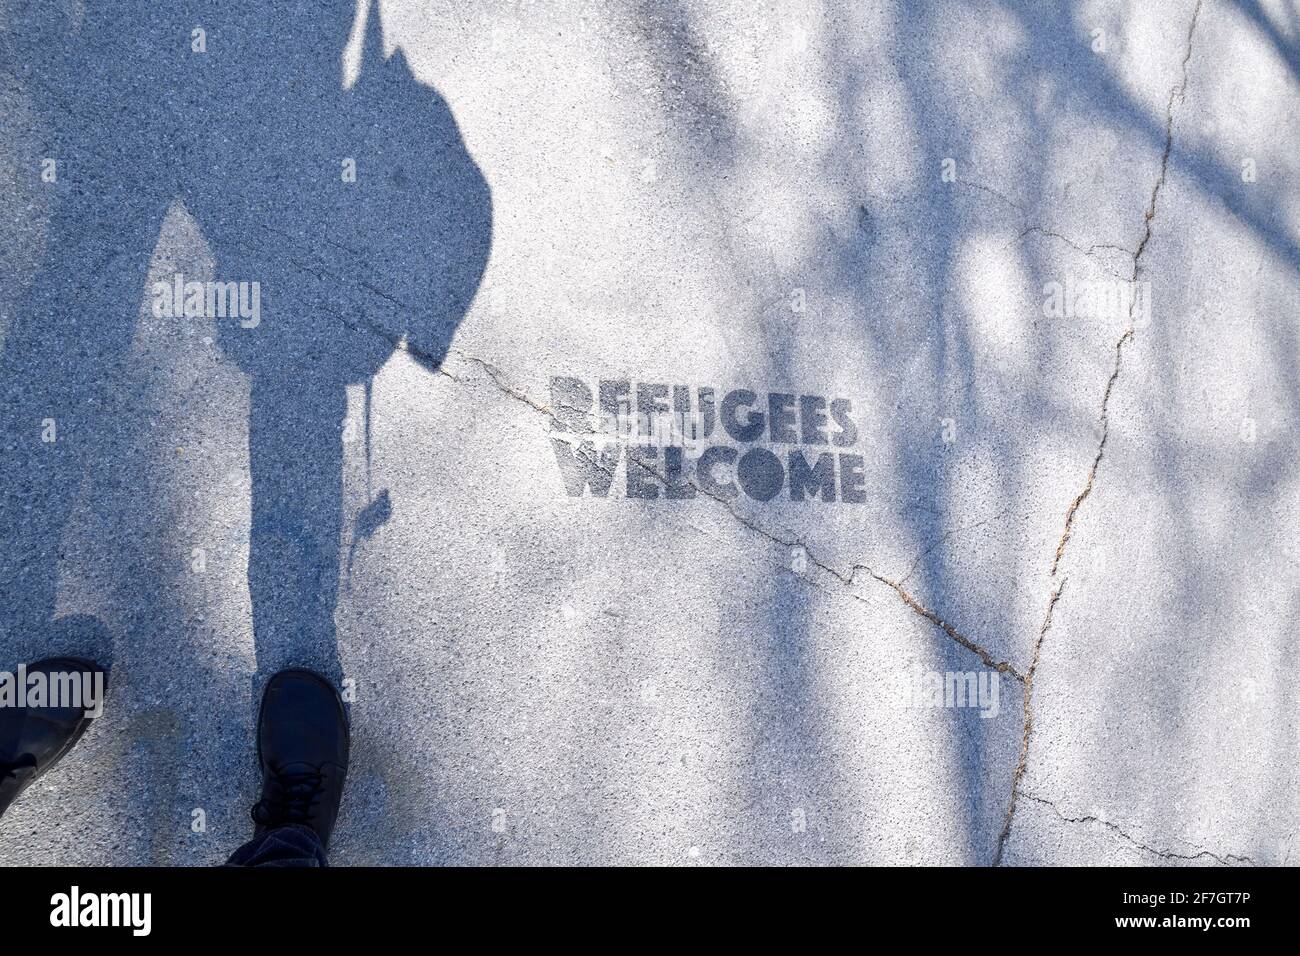 Vienna, Austria. Refugees Welcome lettering Stock Photo